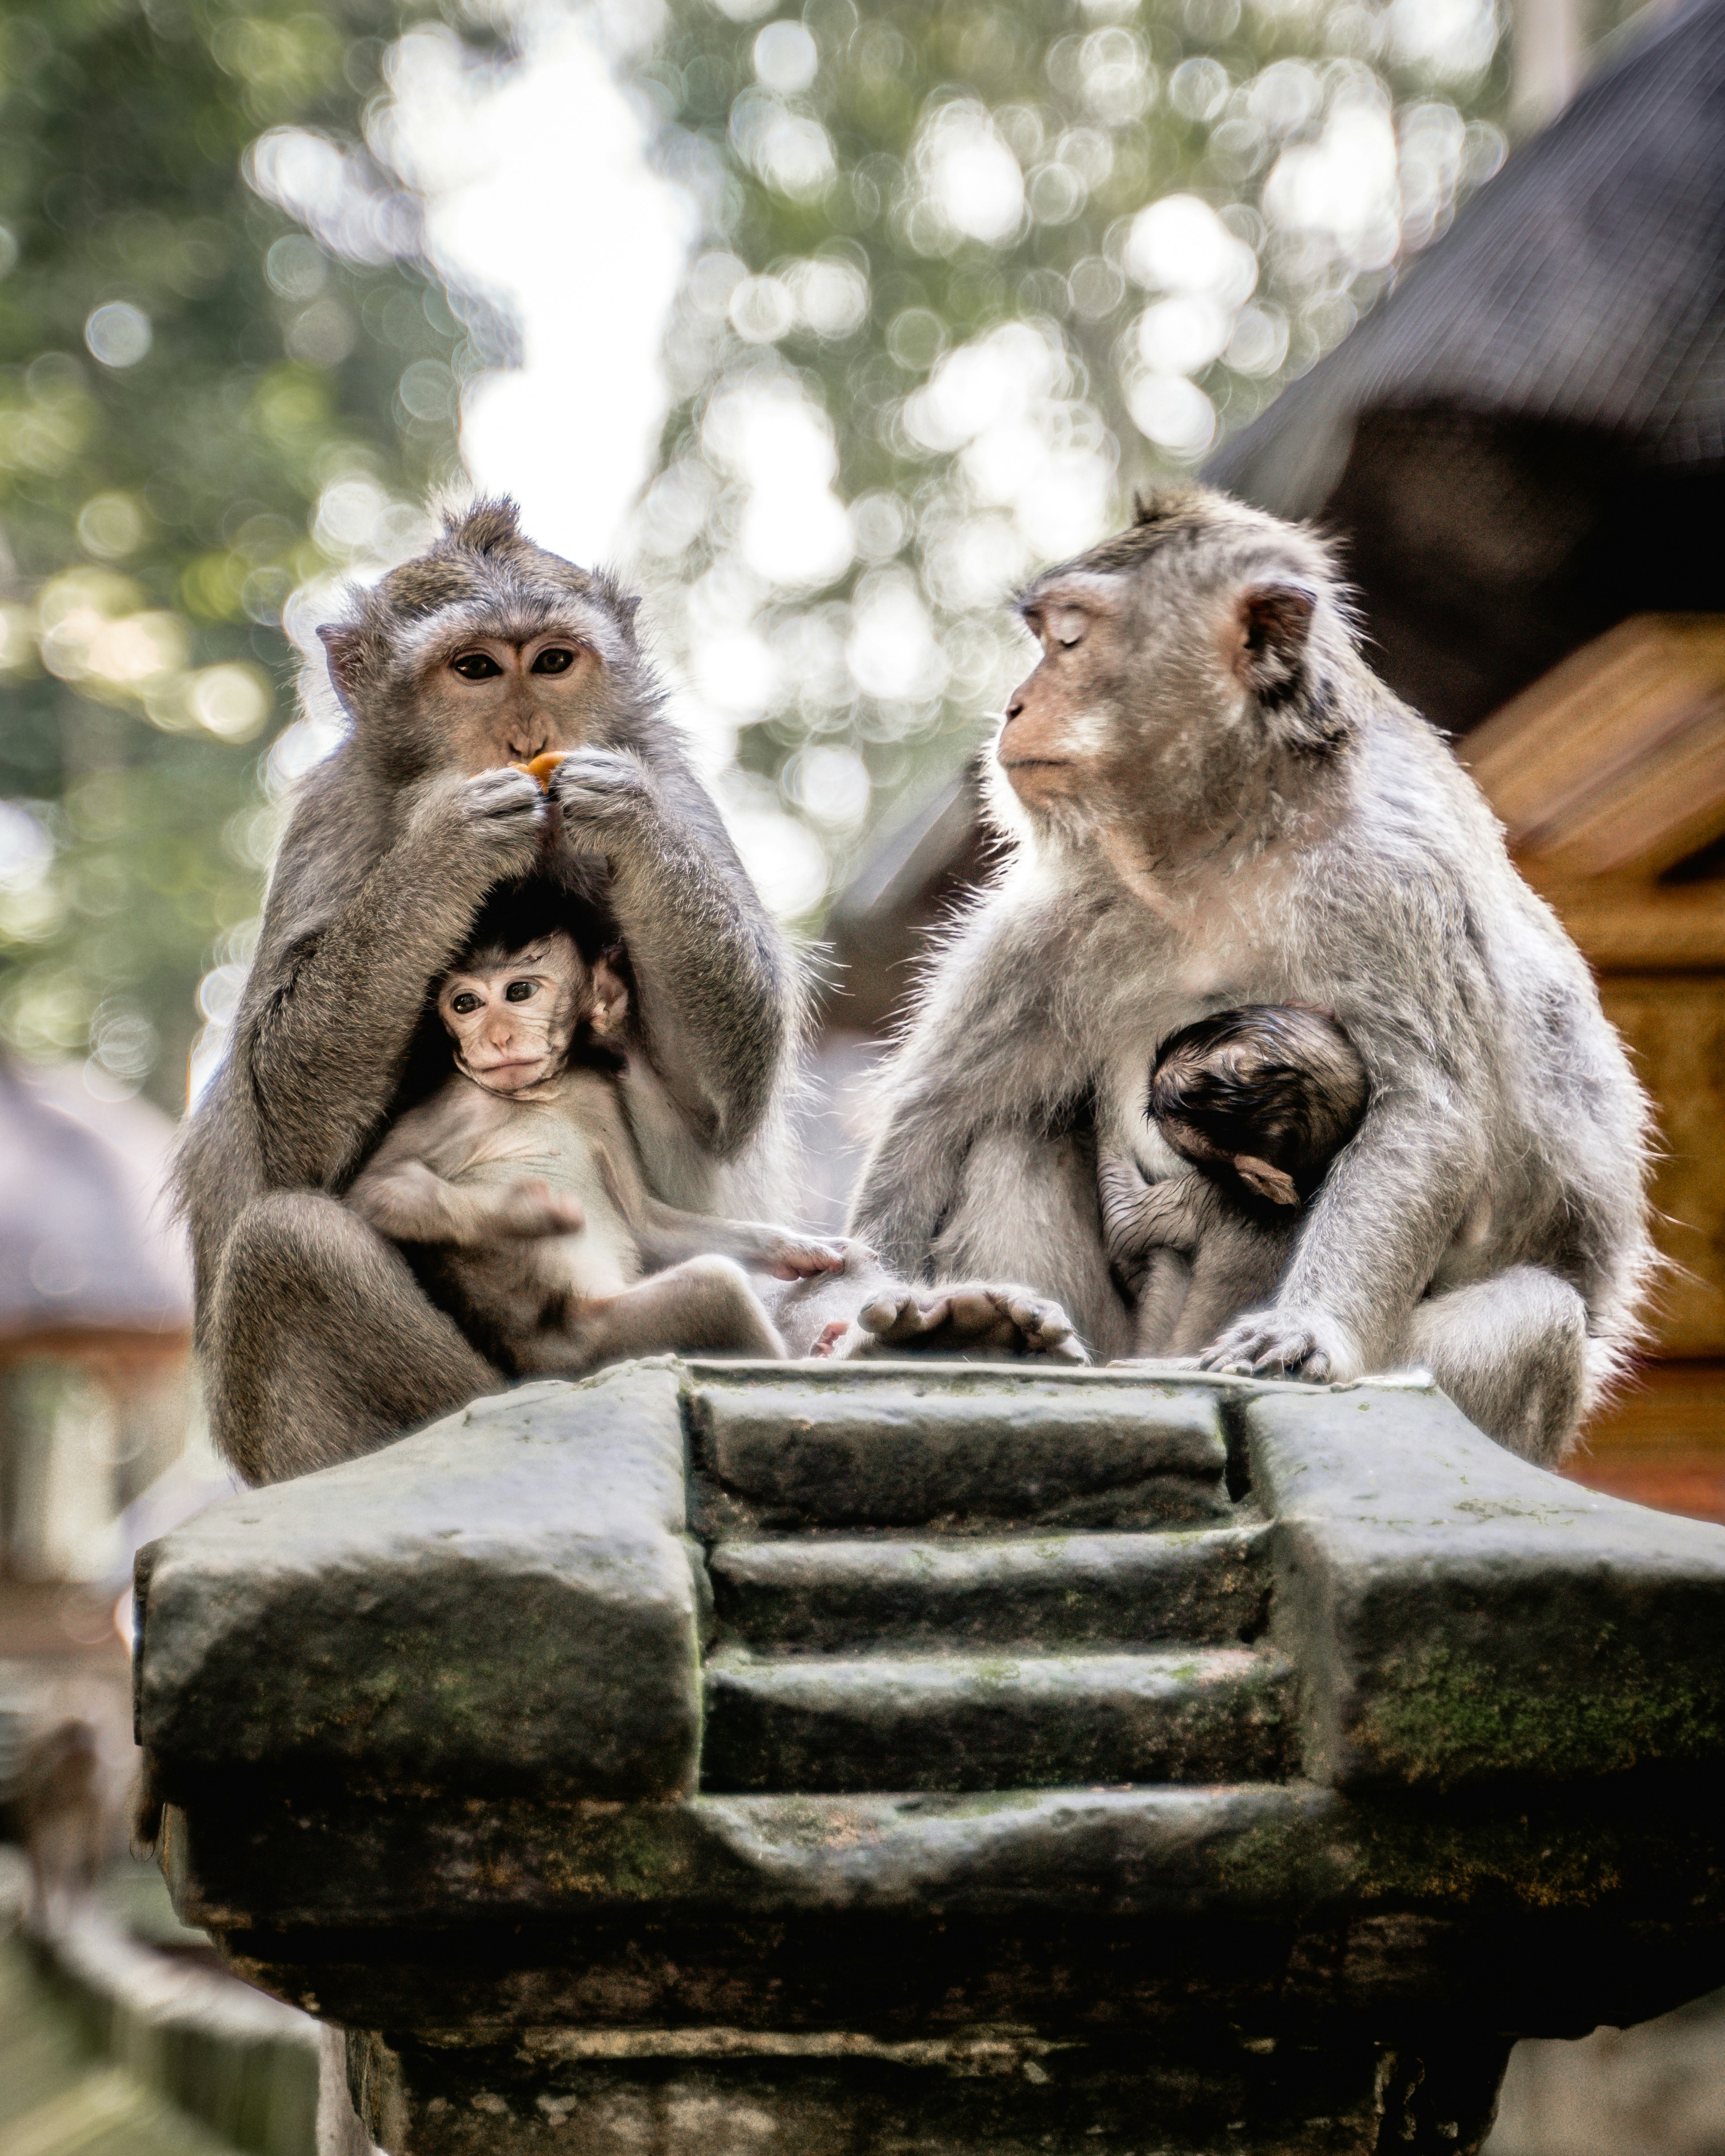 two monkeys sitting on gray concrete bench during daytime